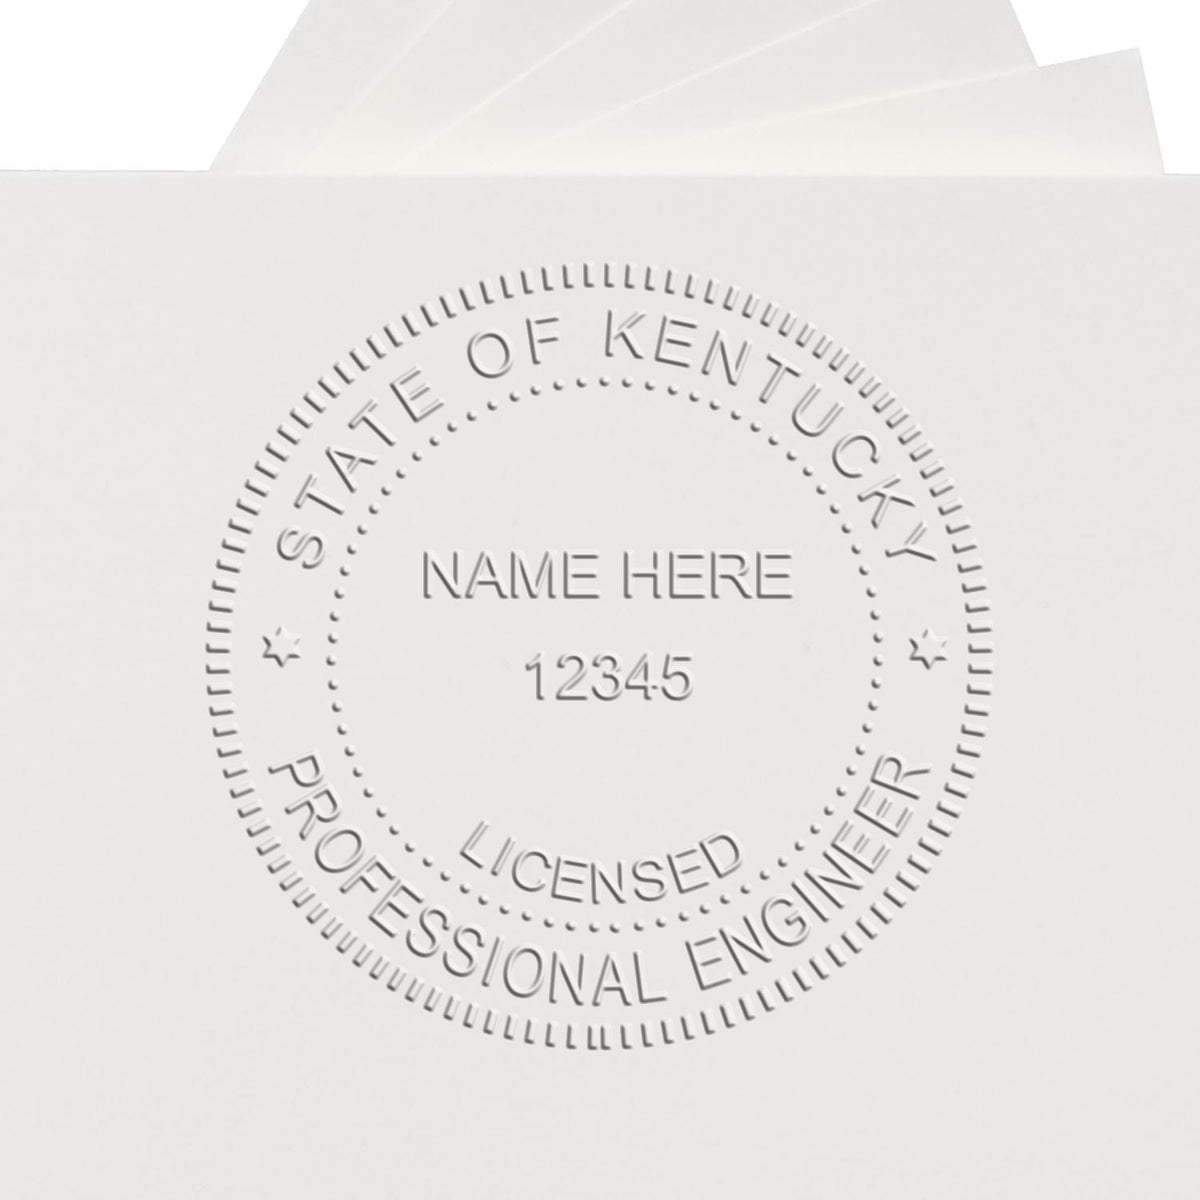 A lifestyle photo showing a stamped image of the Handheld Kentucky Professional Engineer Embosser on a piece of paper